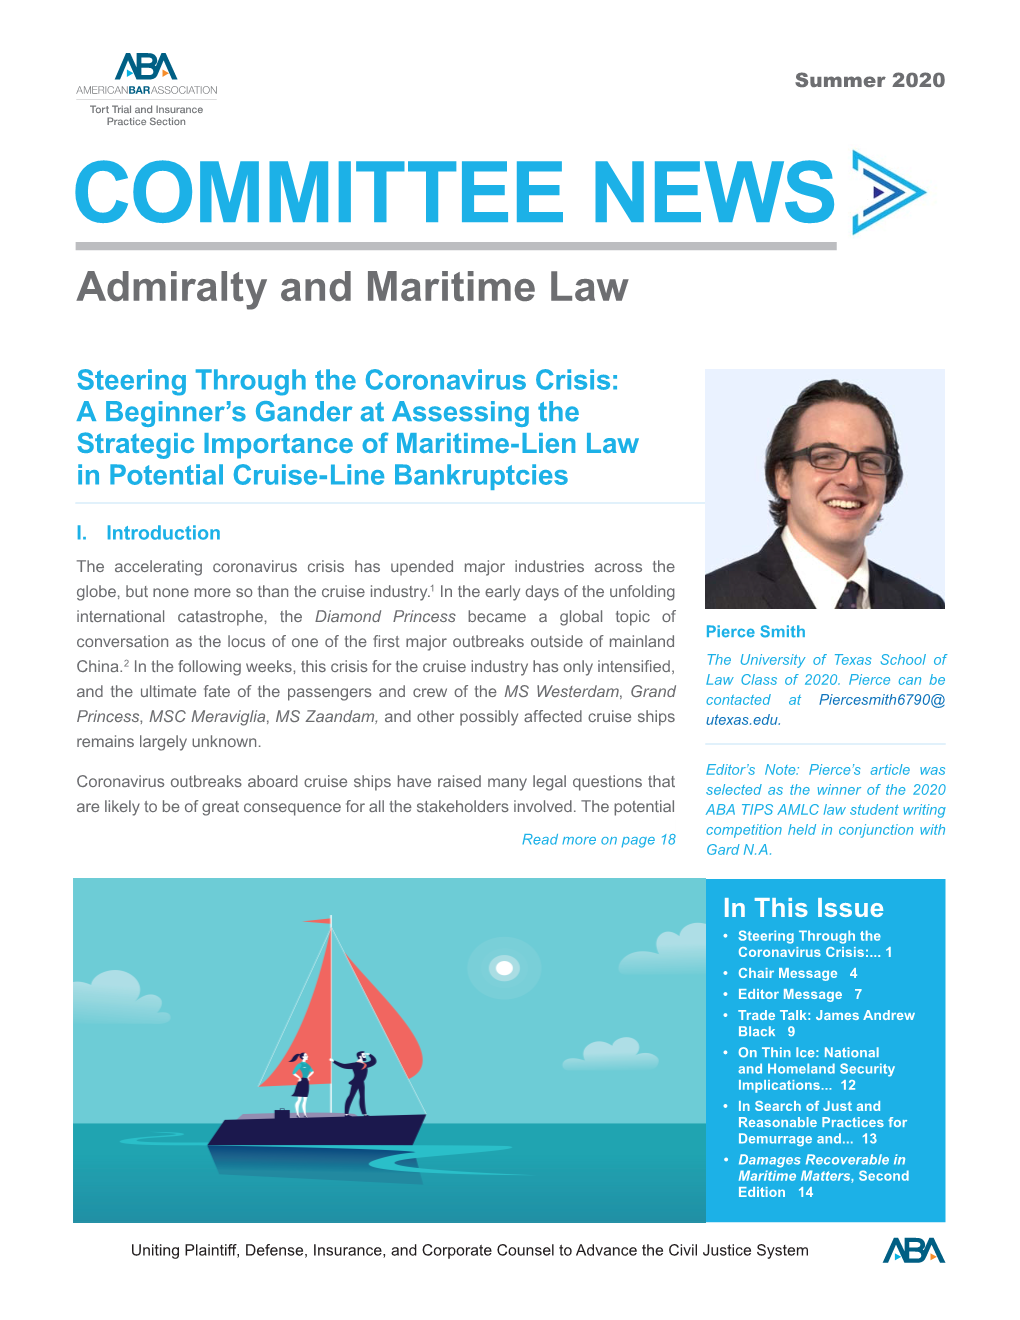 Admiralty and Maritime Law Summer 2020